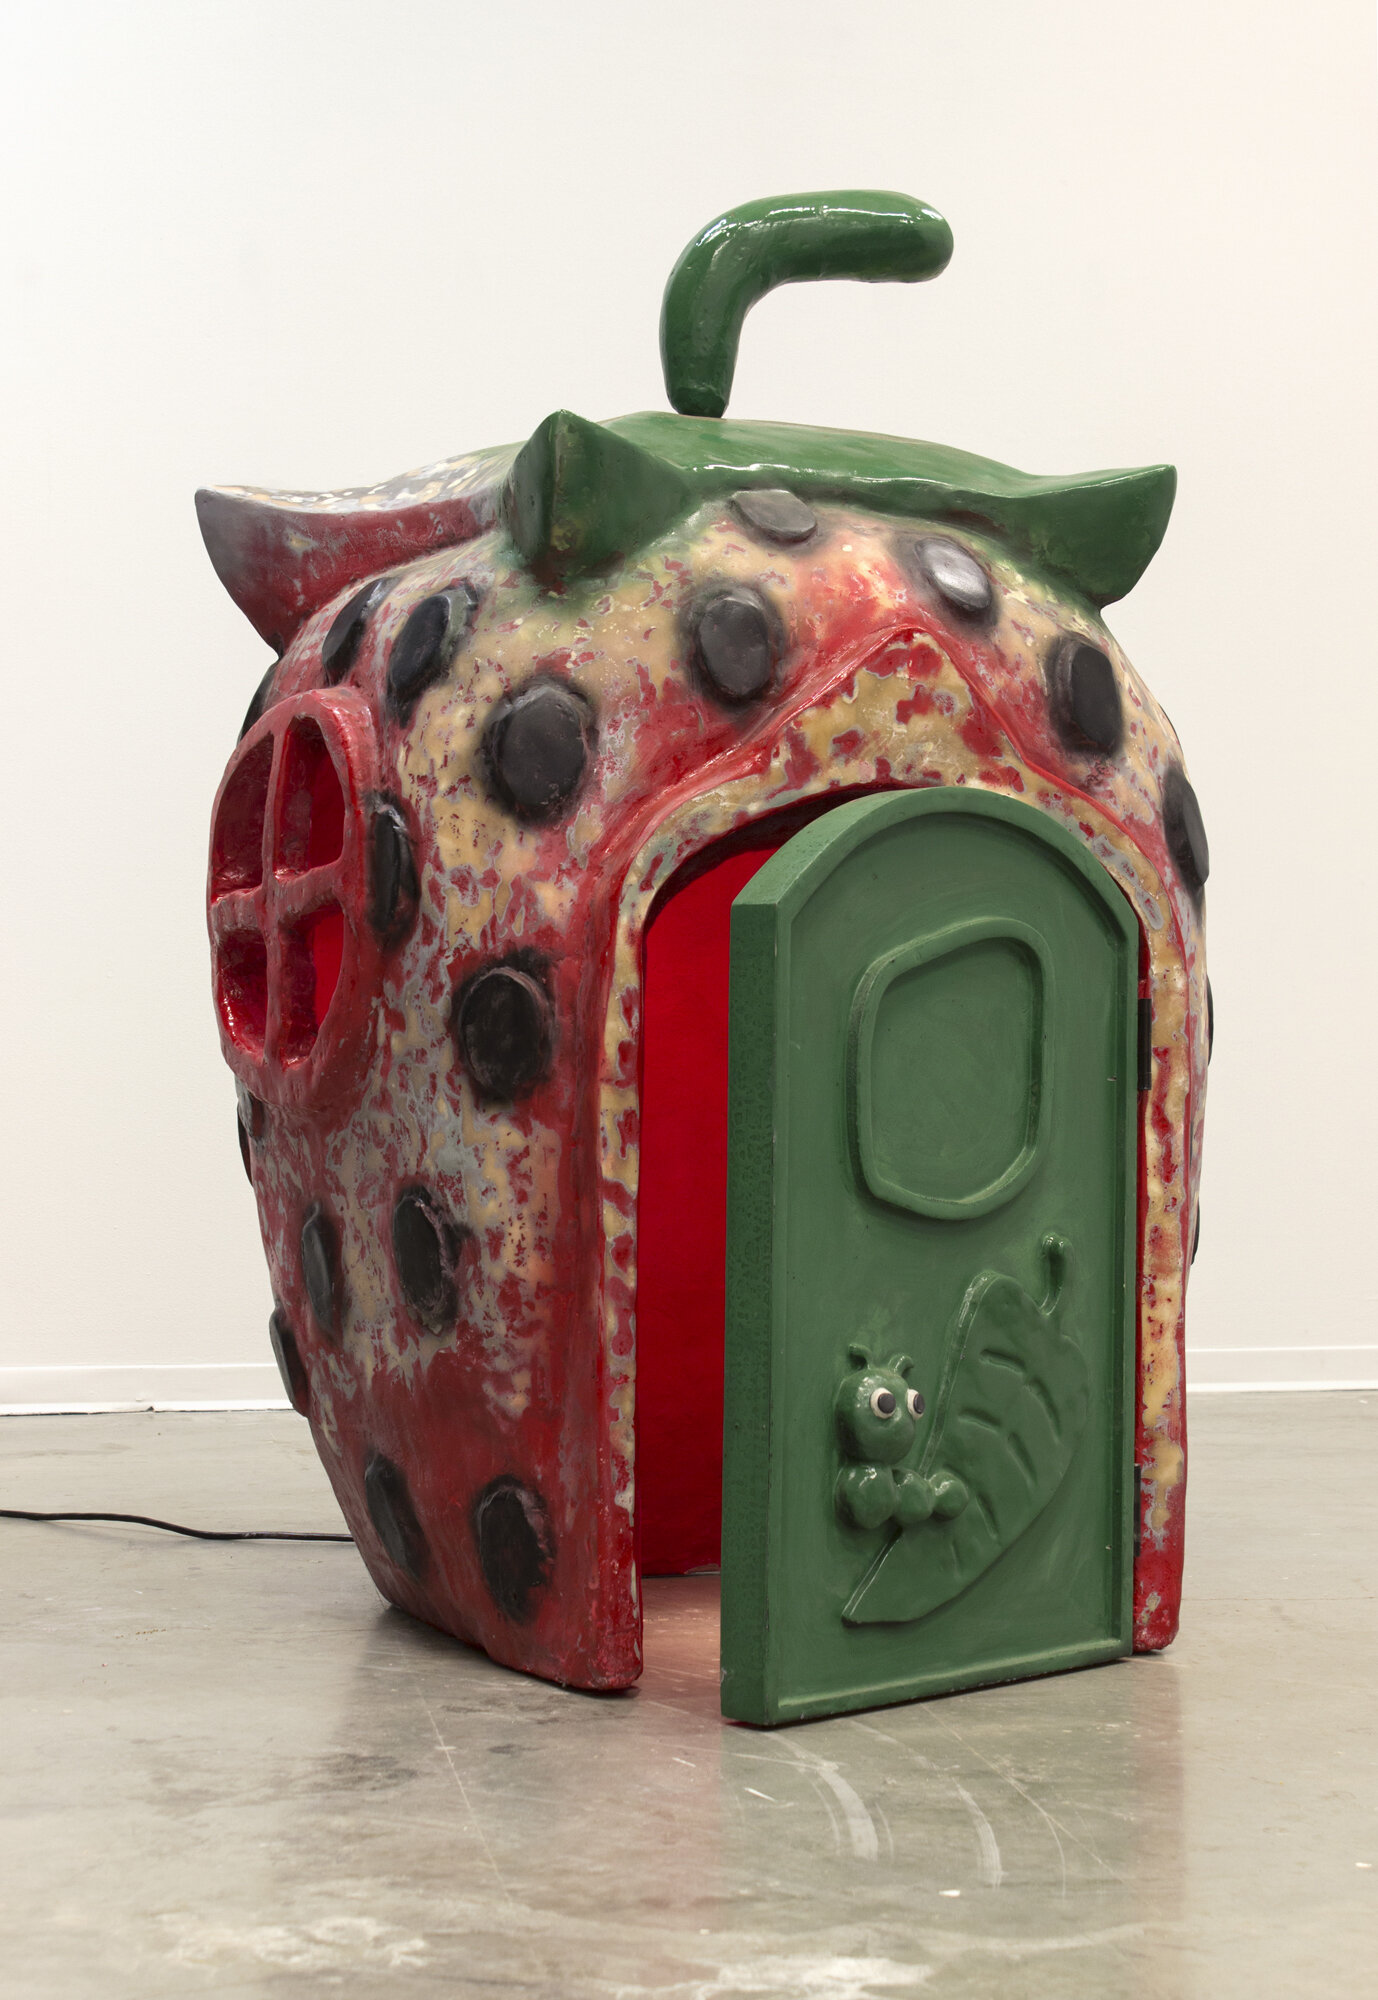  Sam Shoemaker  Duck Meat’s notorious strawberry surprise , 2019 Fiberglass, auto paint, resin, wood, light, electrical cord, flocking 60 x 49 x 50 inches (152 x 124 x 127 cm)  